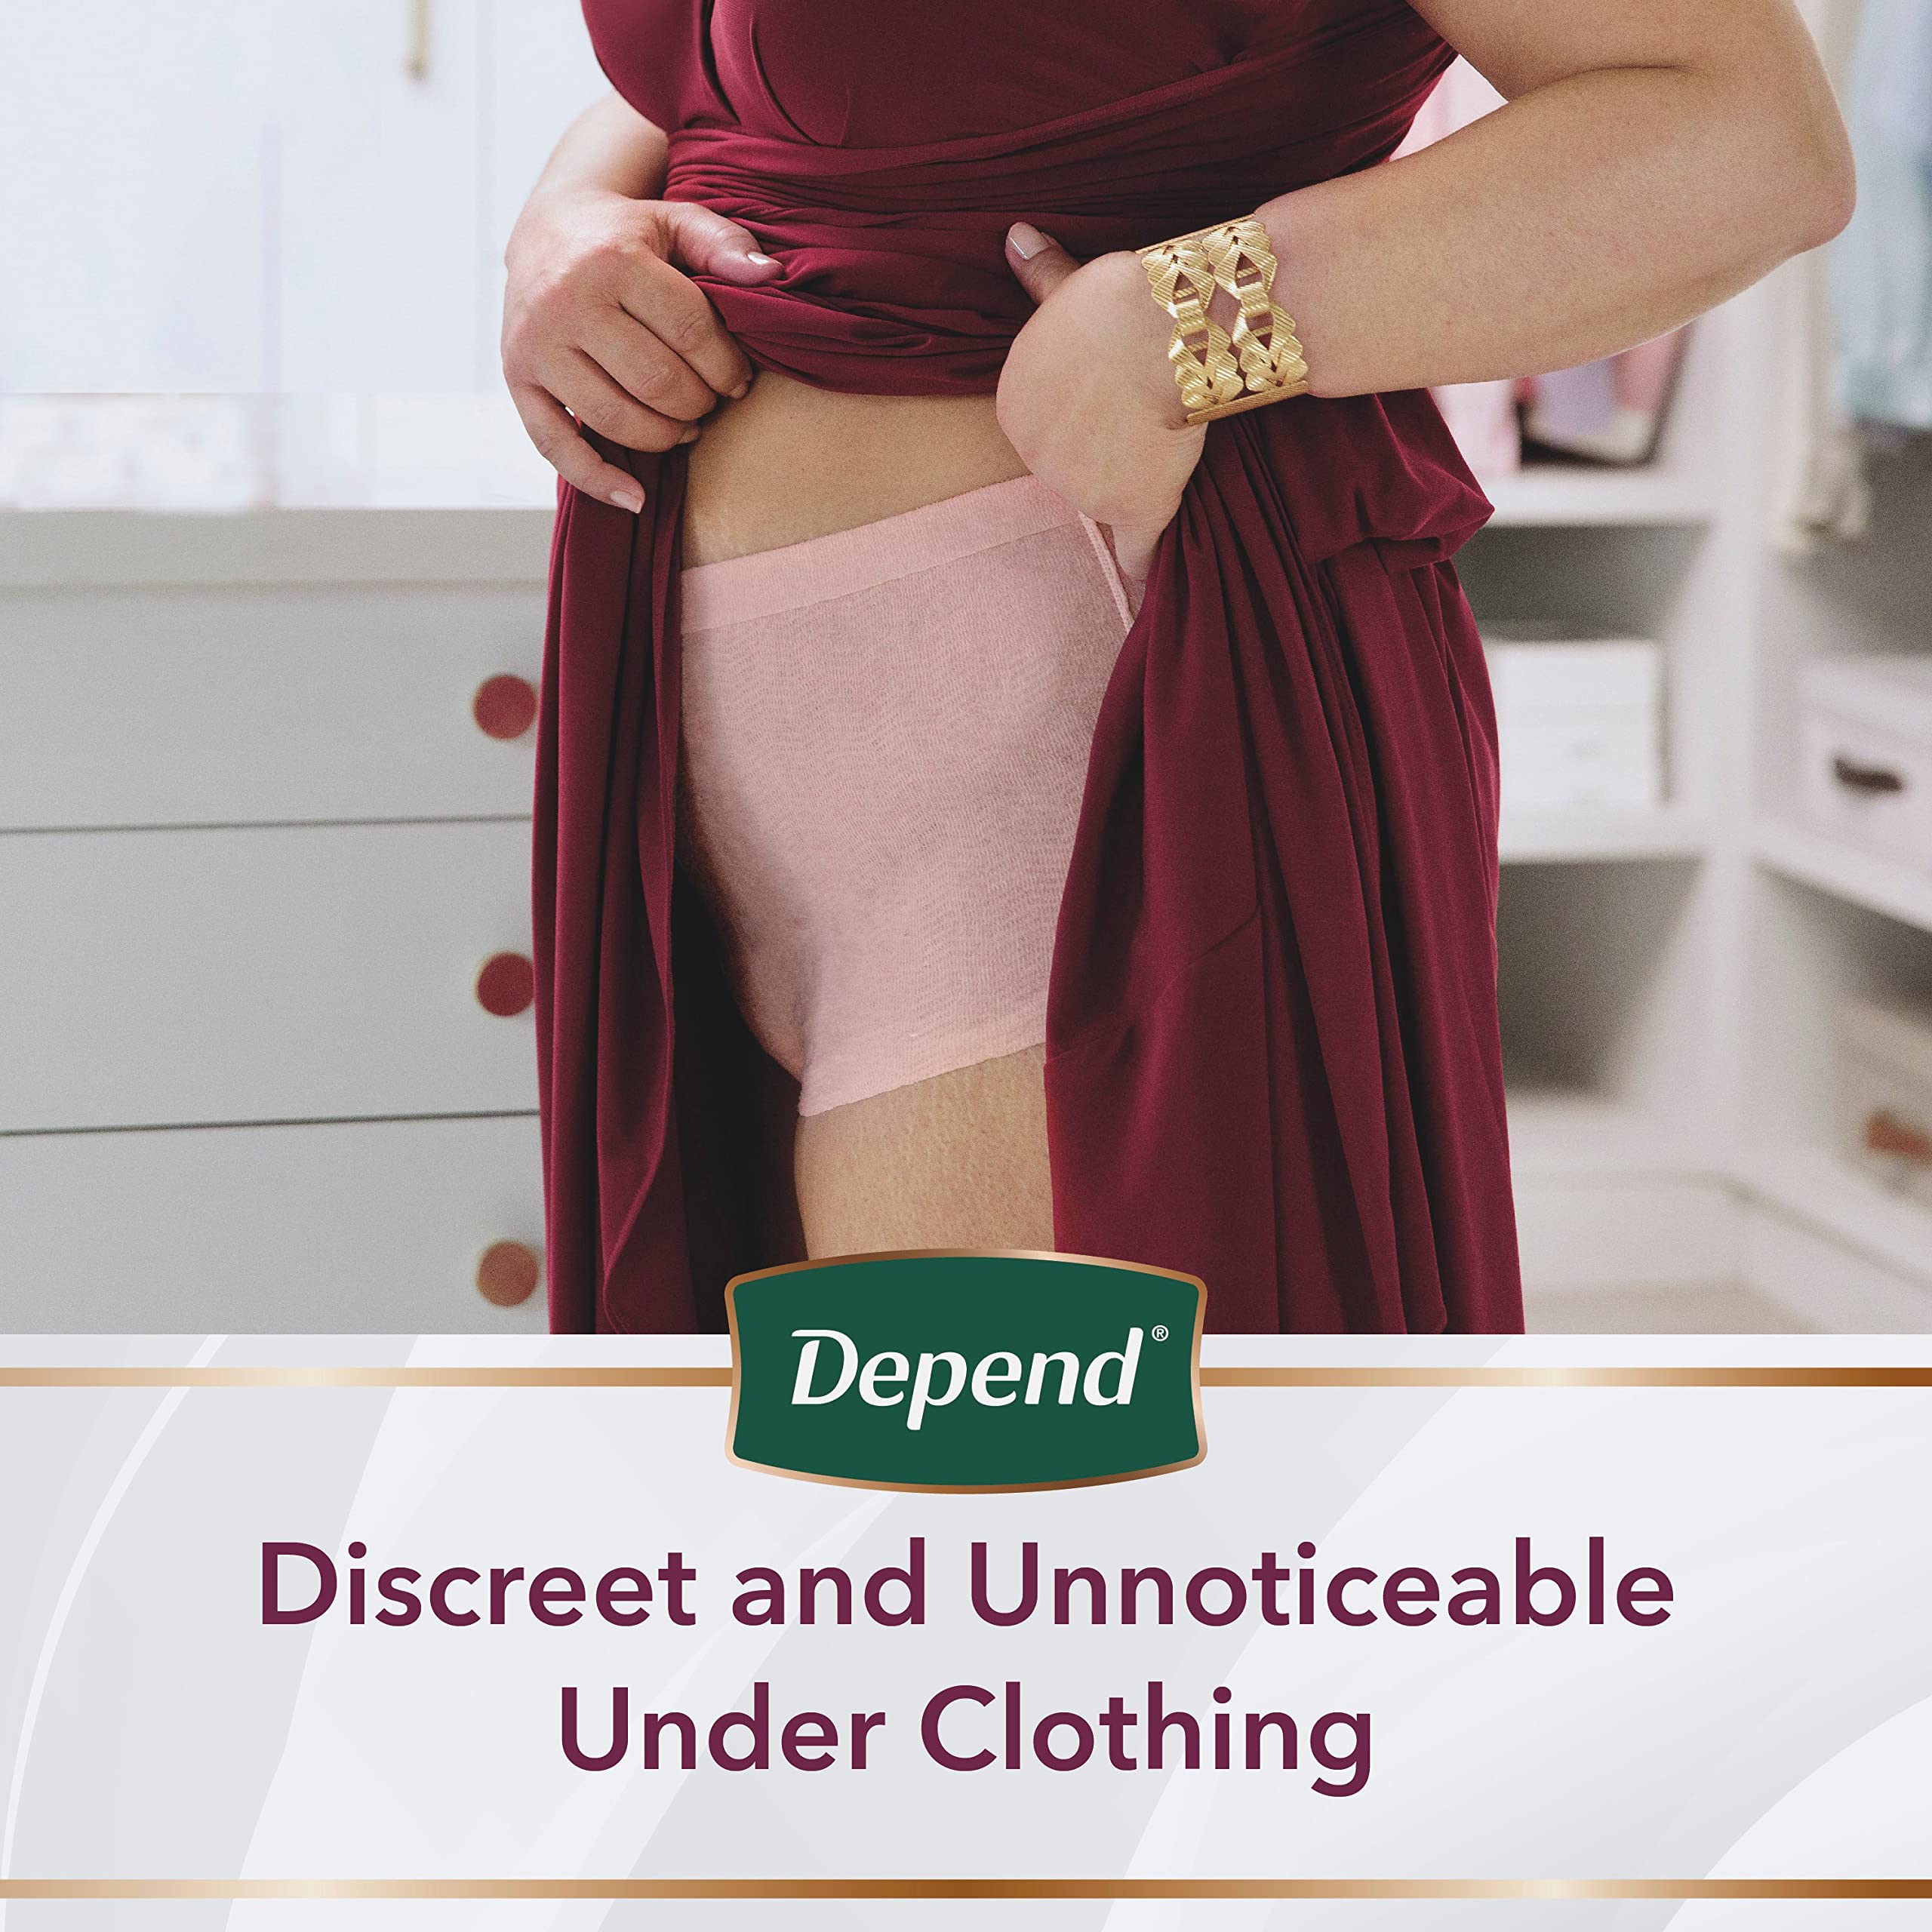 Depend Silhouette Women's Incontinence Underwear, Small, Maximum Absorbency - 60 Count (2 Packs of 30)